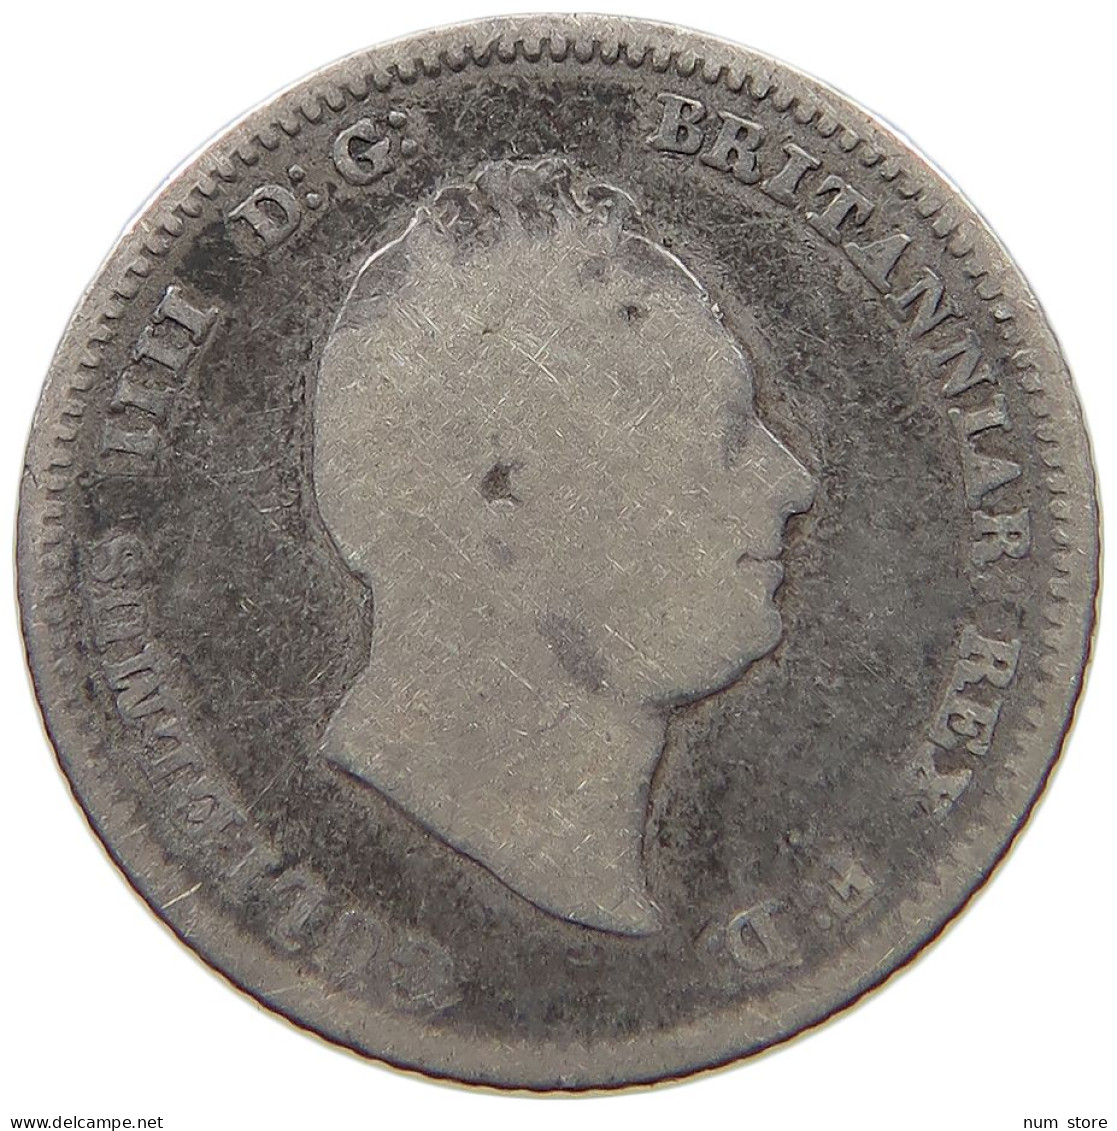 GREAT BRITAIN FOURPENCE 1836 WILLIAM IV. (1830-1837) #a033 0203 - G. 4 Pence/ Groat